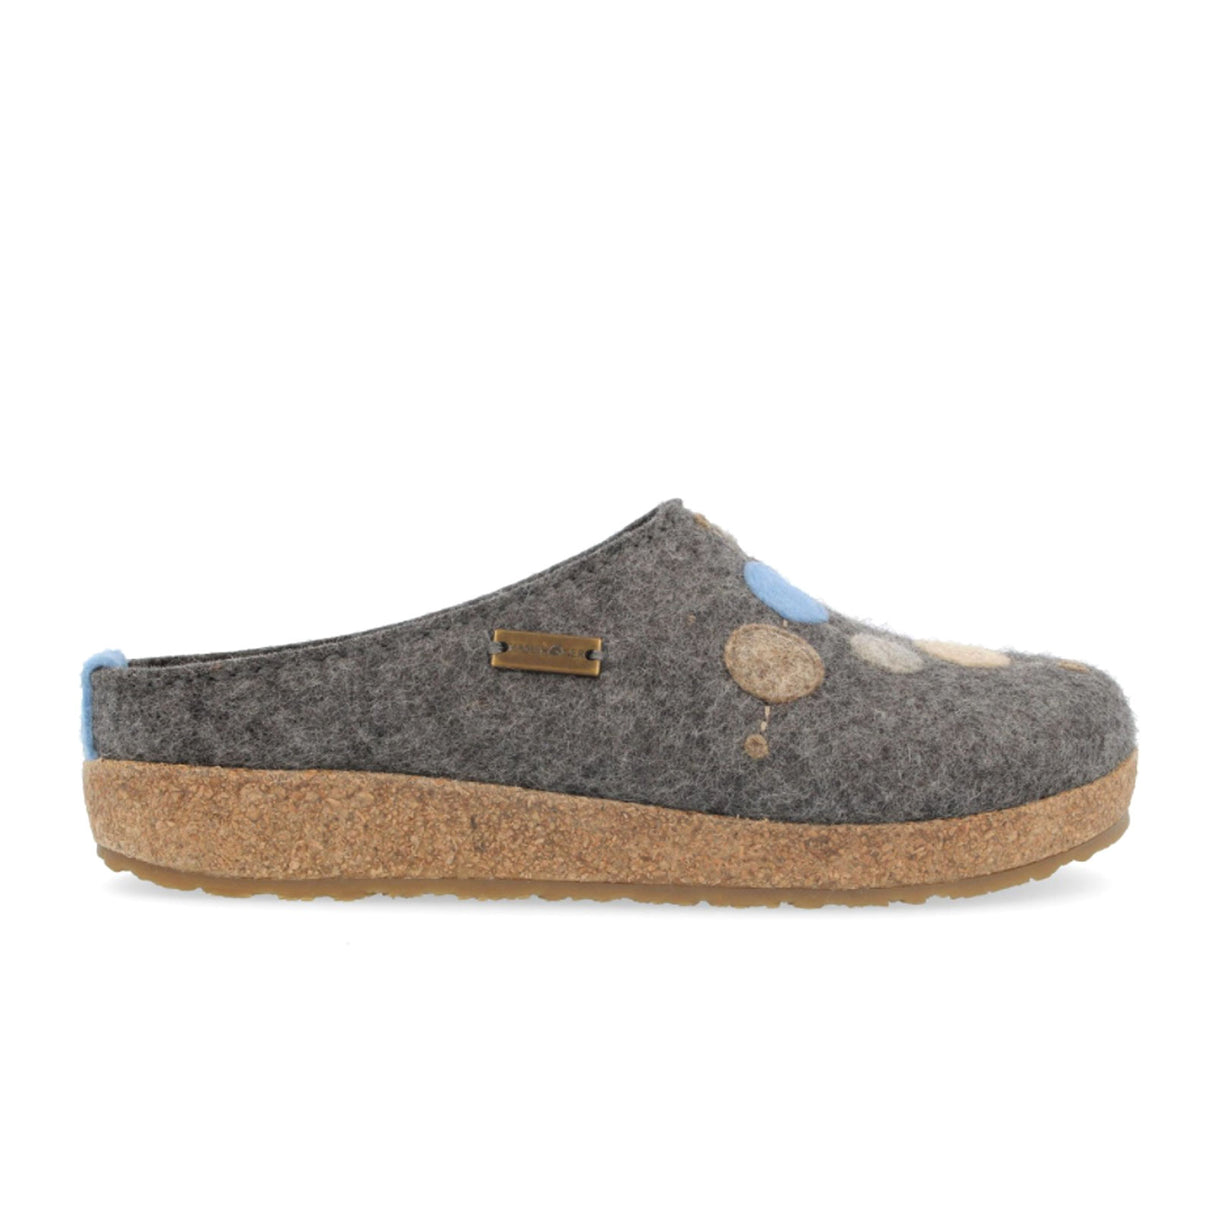 Haflinger Faible Clog (Women) - Grey Dress-Casual - Clogs & Mules - The Heel Shoe Fitters